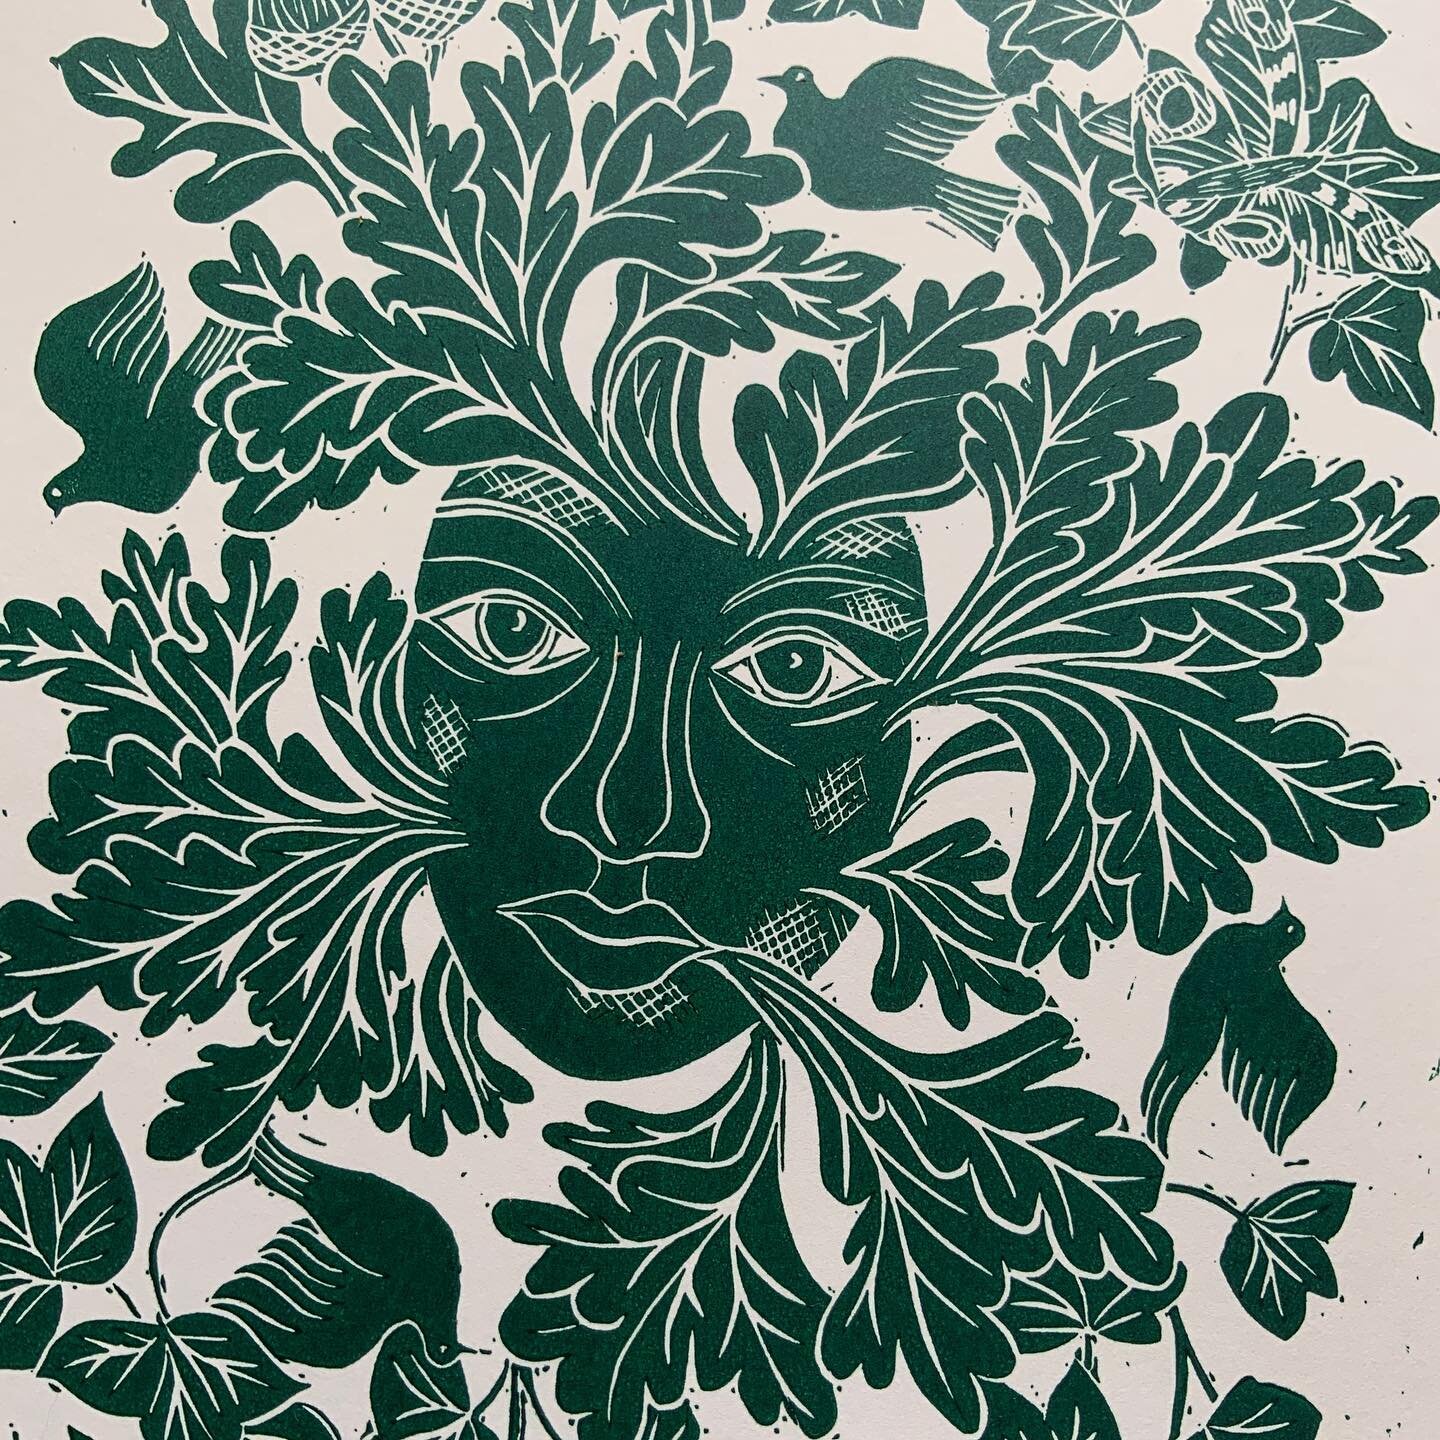 &lsquo;Green Man&rsquo; linocut. 

A little close up of my new print. He&rsquo;s printed on A3 paper and includes free UK delivery at the moment. 💚 

Head over to my website:

viviennekeable.com
.
.
.
#greenman #linocut #folklore #lino #printmaker #